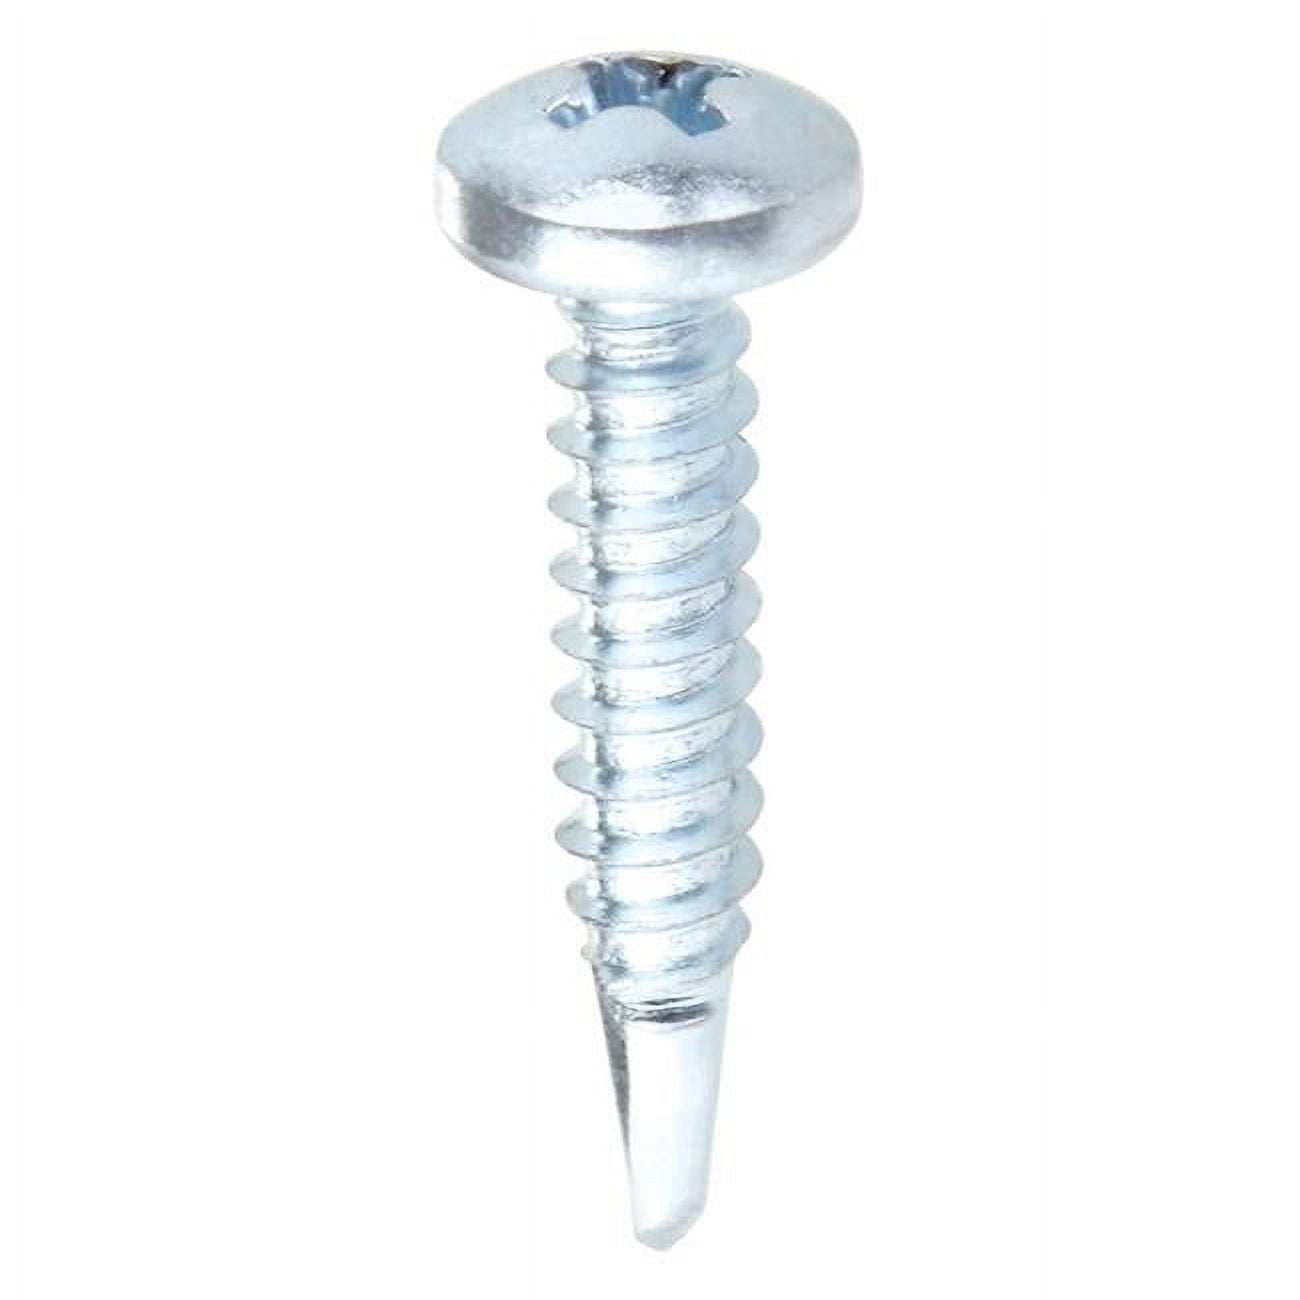 5007670 No. 8 X 2.38 In. Phillips Bugle Head Zinc-plated Steel Self-drill Drywall Screws, 5 Lbs - Case Of 6